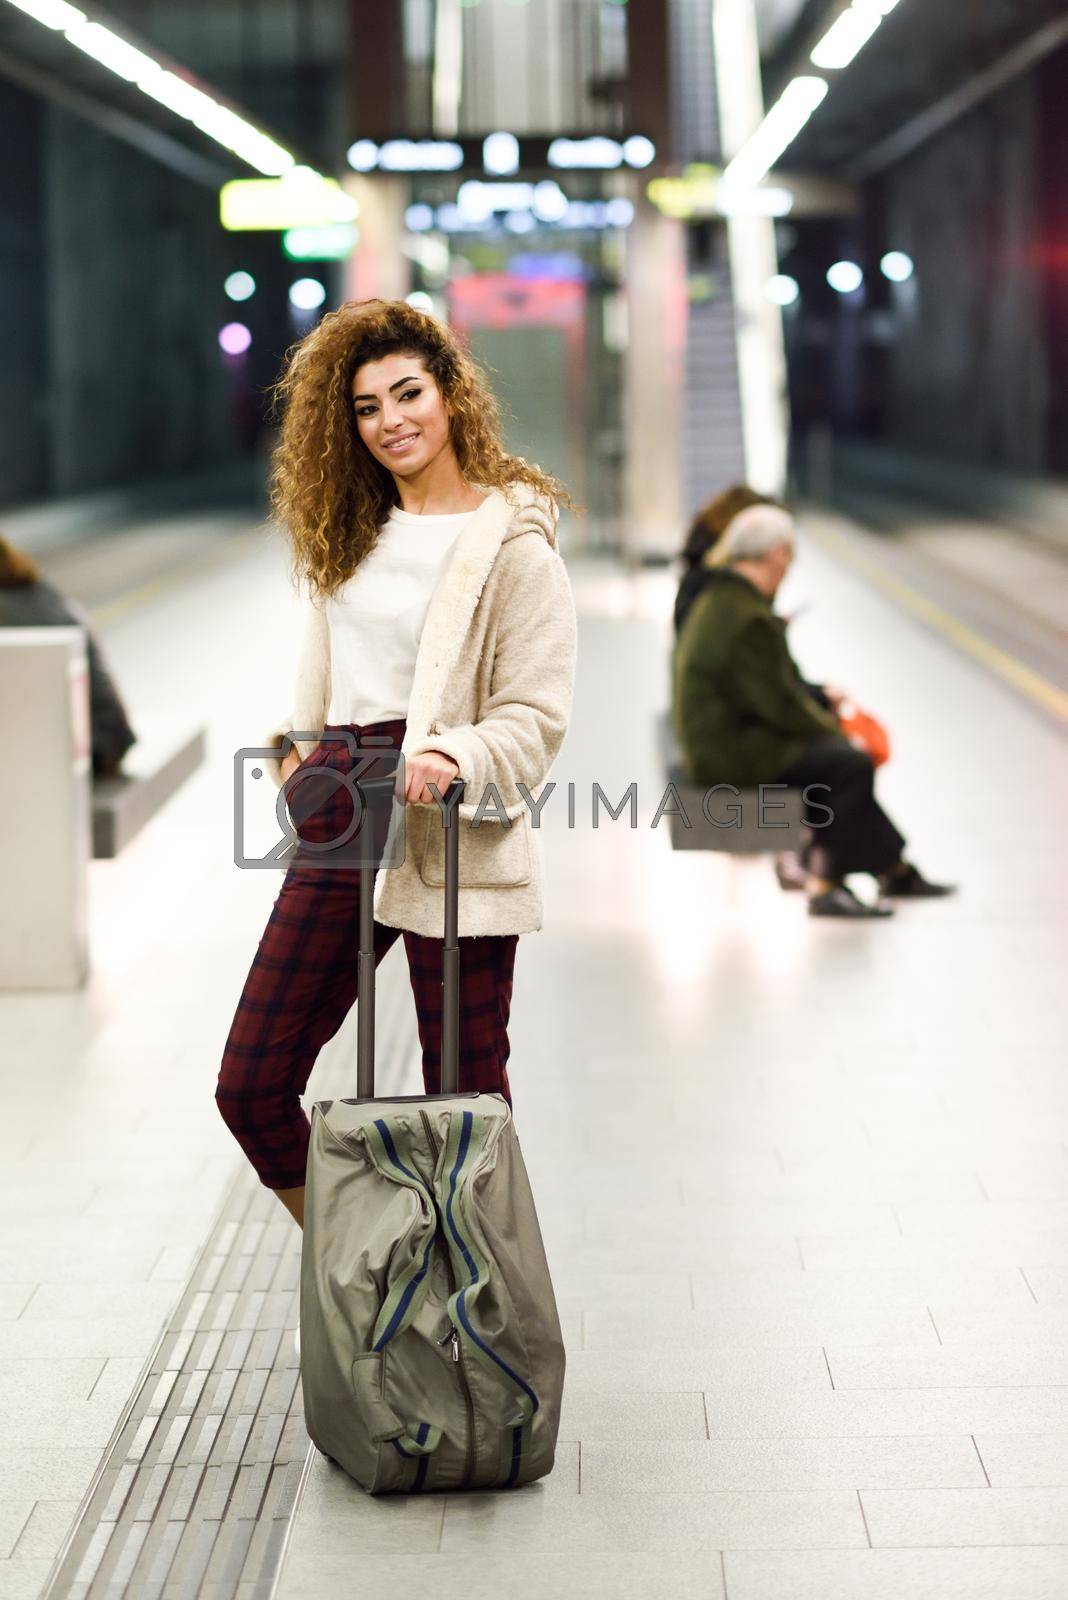 Beautiful young arabic woman waiting her train in a subway station. Arab traveler in casual clothes.